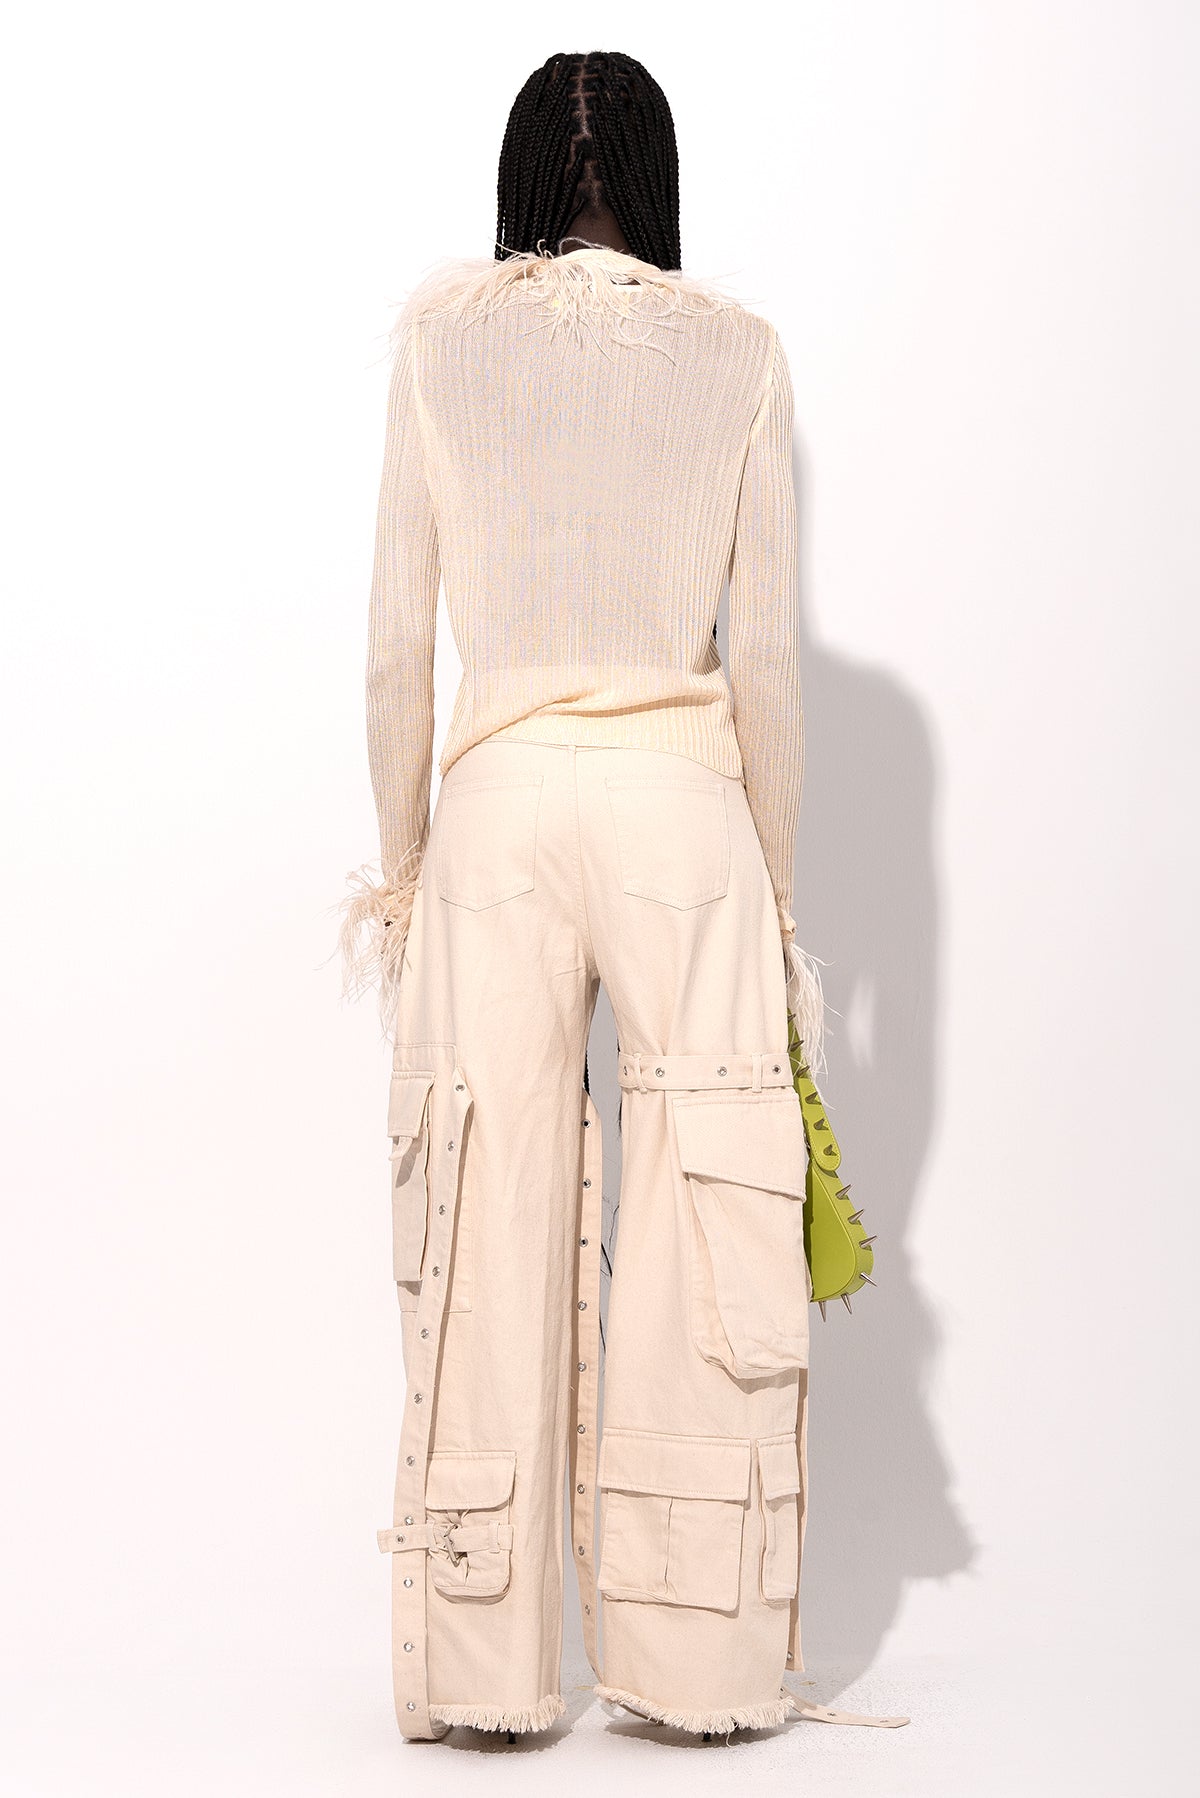 OFF WHITE VISCOSE KNITTED TOP WITH FEATHERS marques almeida